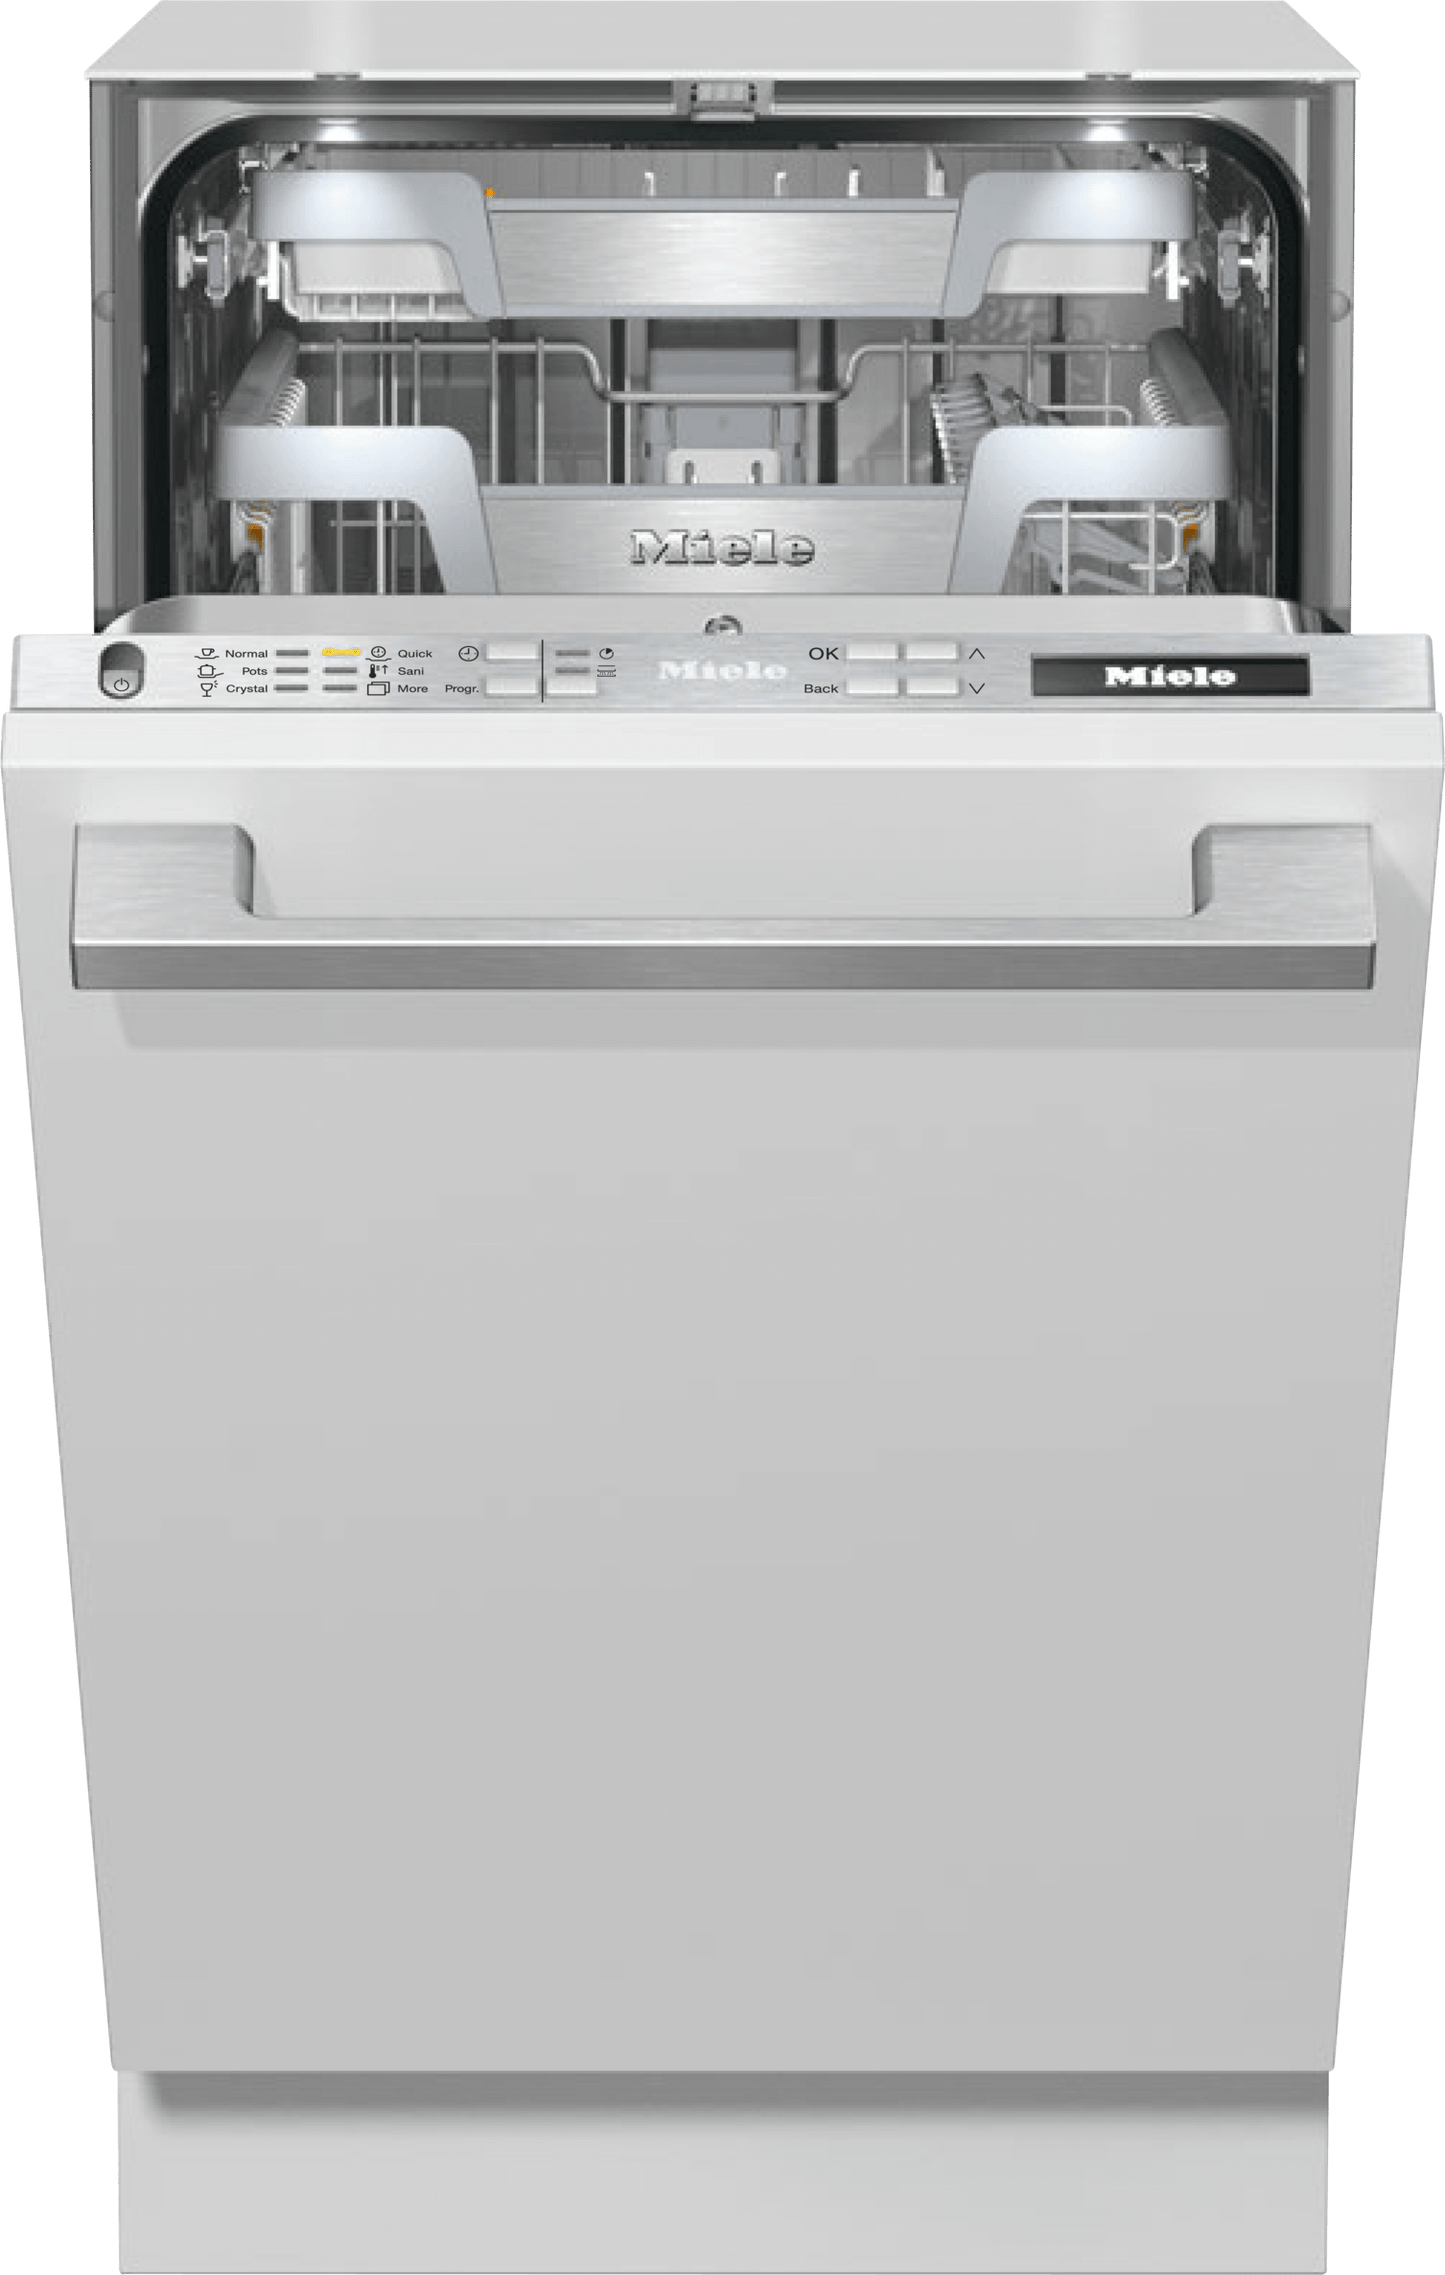 Miele G5892SCVISLSTAINLESSSTEEL G 5892 Scvi Sl - Fully Integrated Dishwasher, 18" (45 Cm) With Networking For Even Greater Convenience.